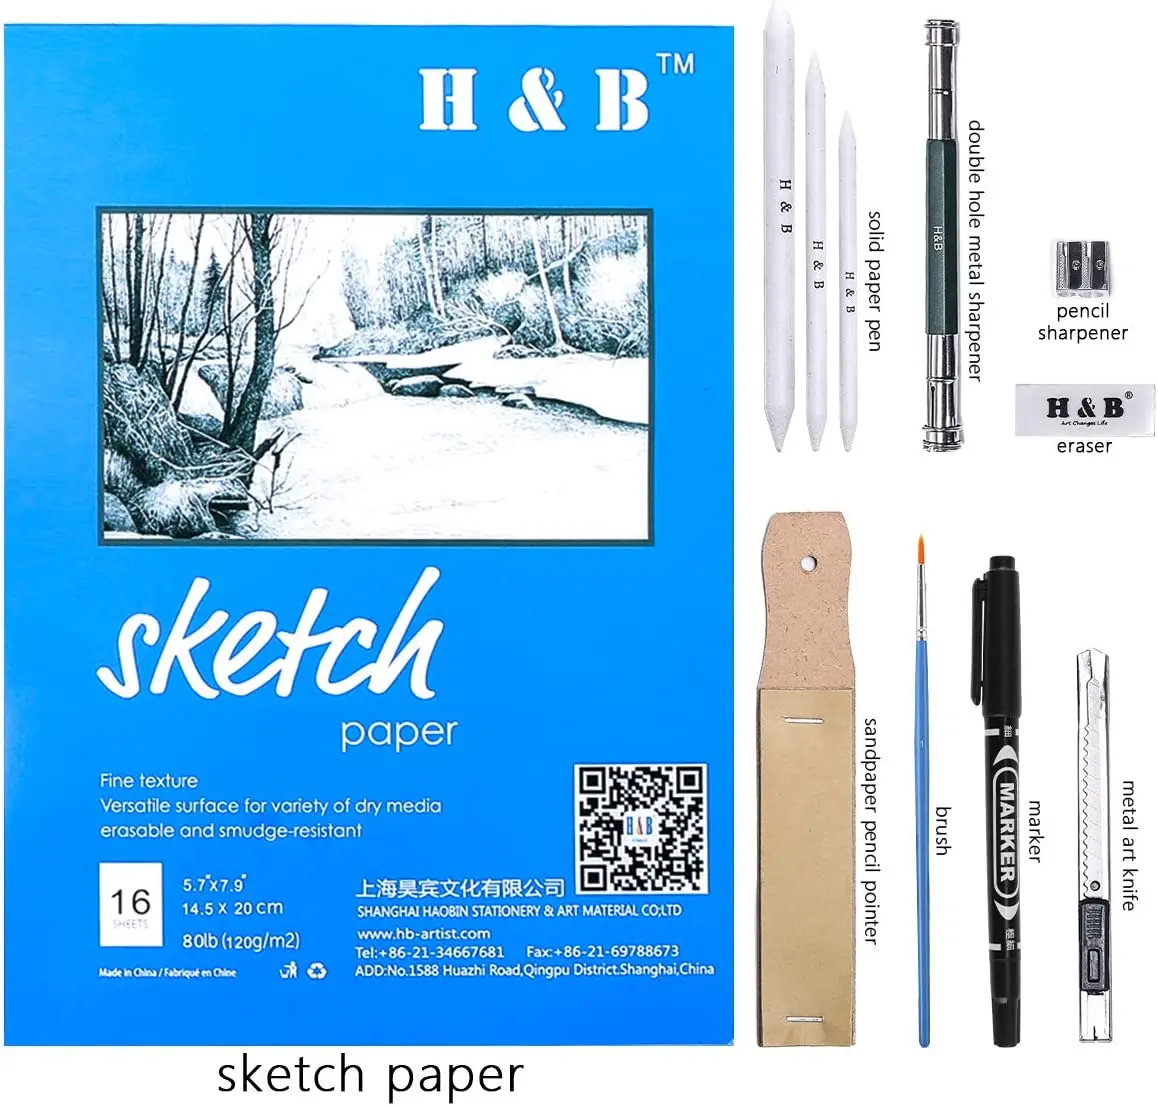 https://ae01.alicdn.com/kf/S858881a2241946ef934e12f566823d4aM/72pcs-Drawing-Art-Supplies-Kit-Colored-Sketching-Pencils-for-Artists-Kids-Adults-Teens-Professional-Art-Pencil.jpg